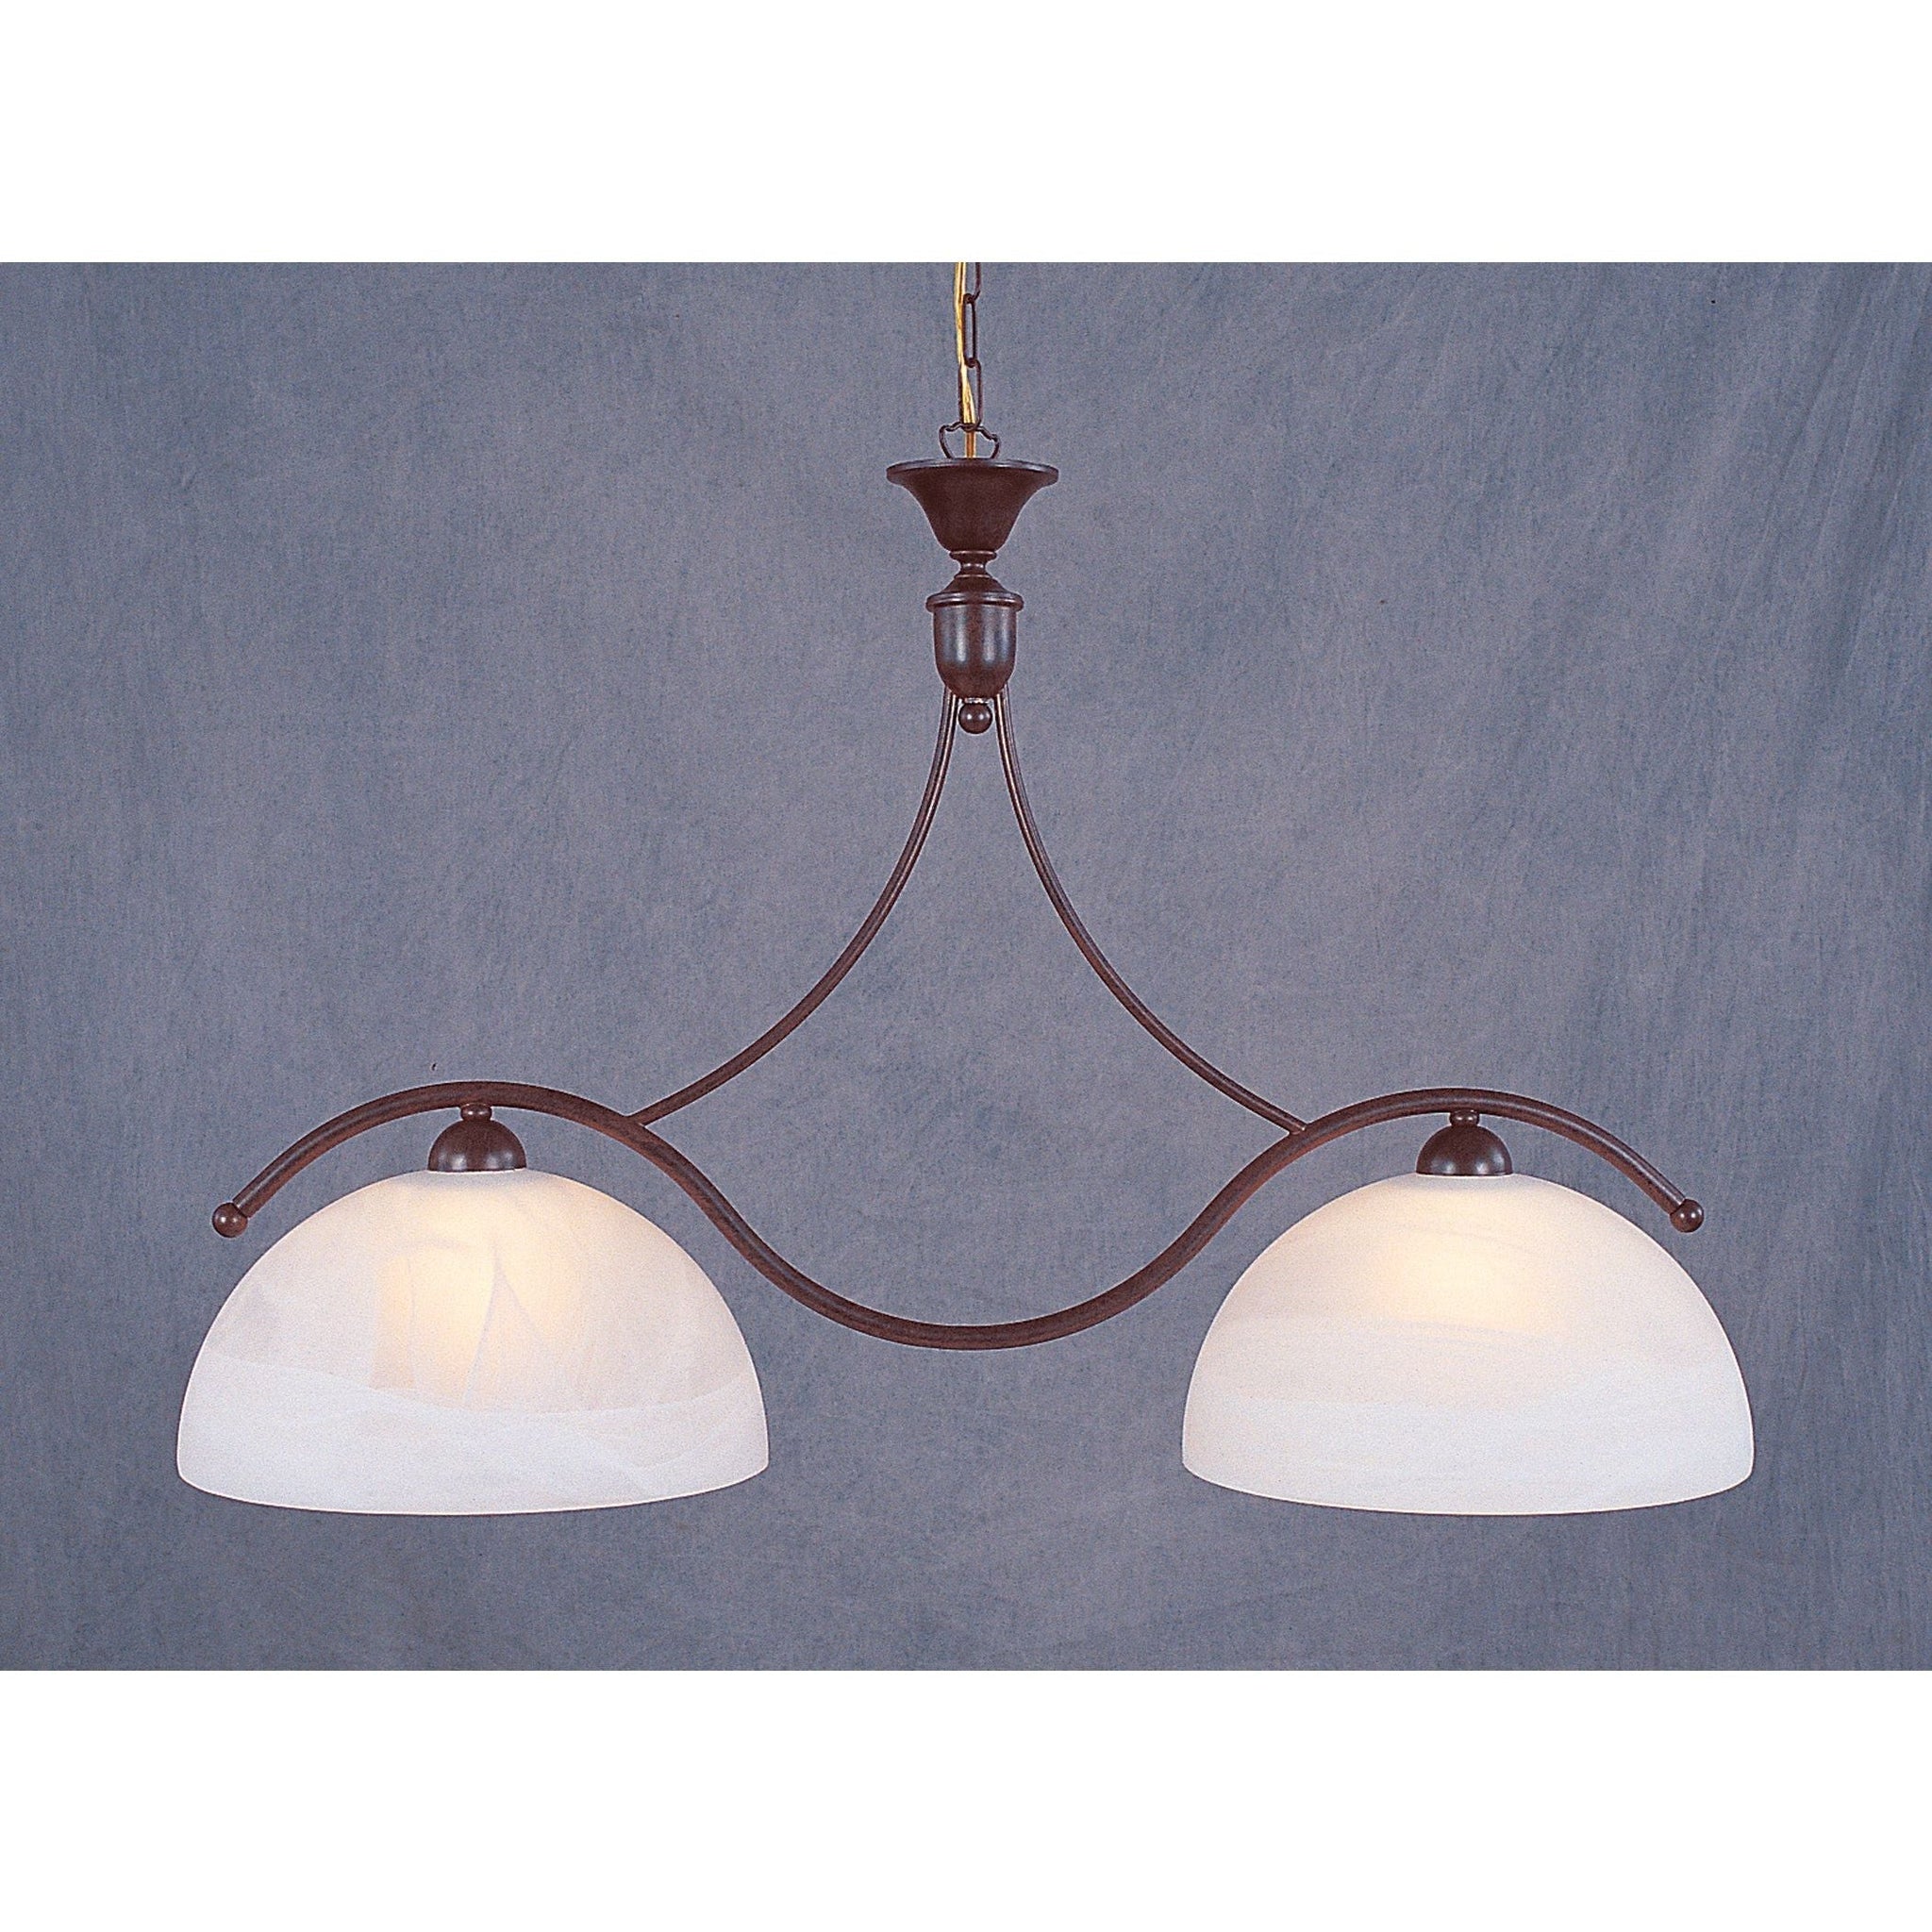 European Crafted 2-Light Linear Chandelier